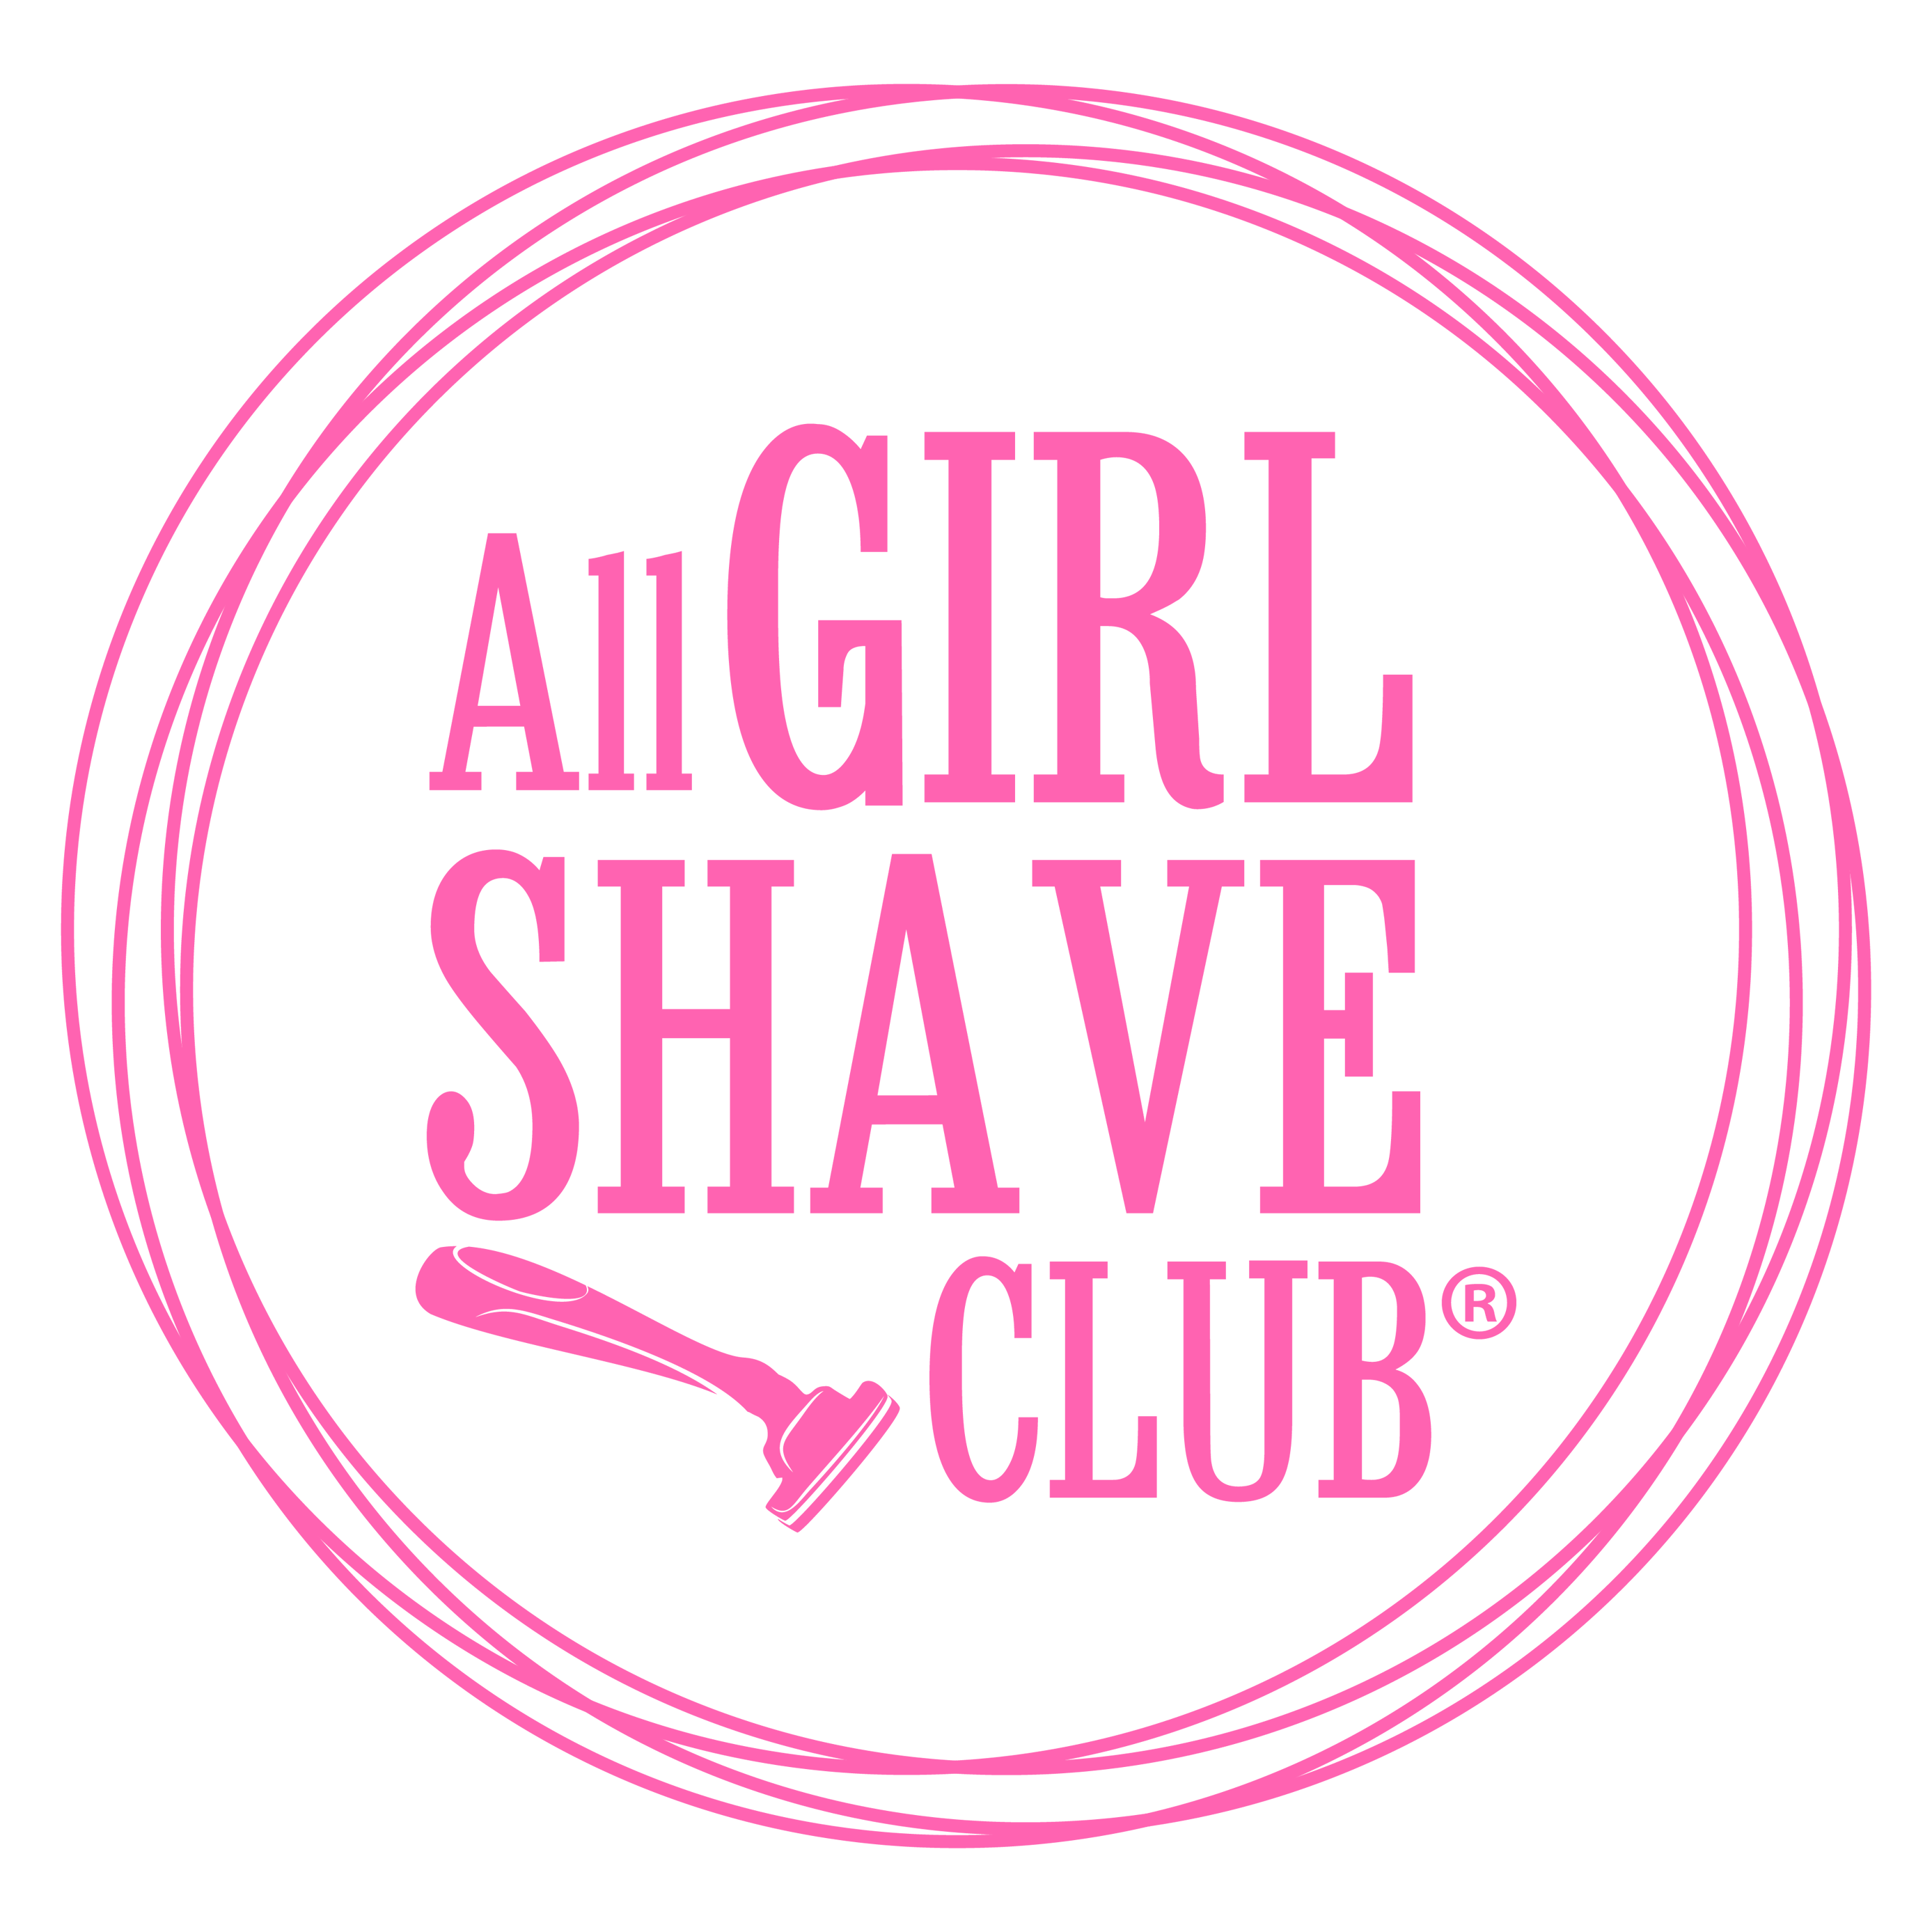 All Girl Shave Club